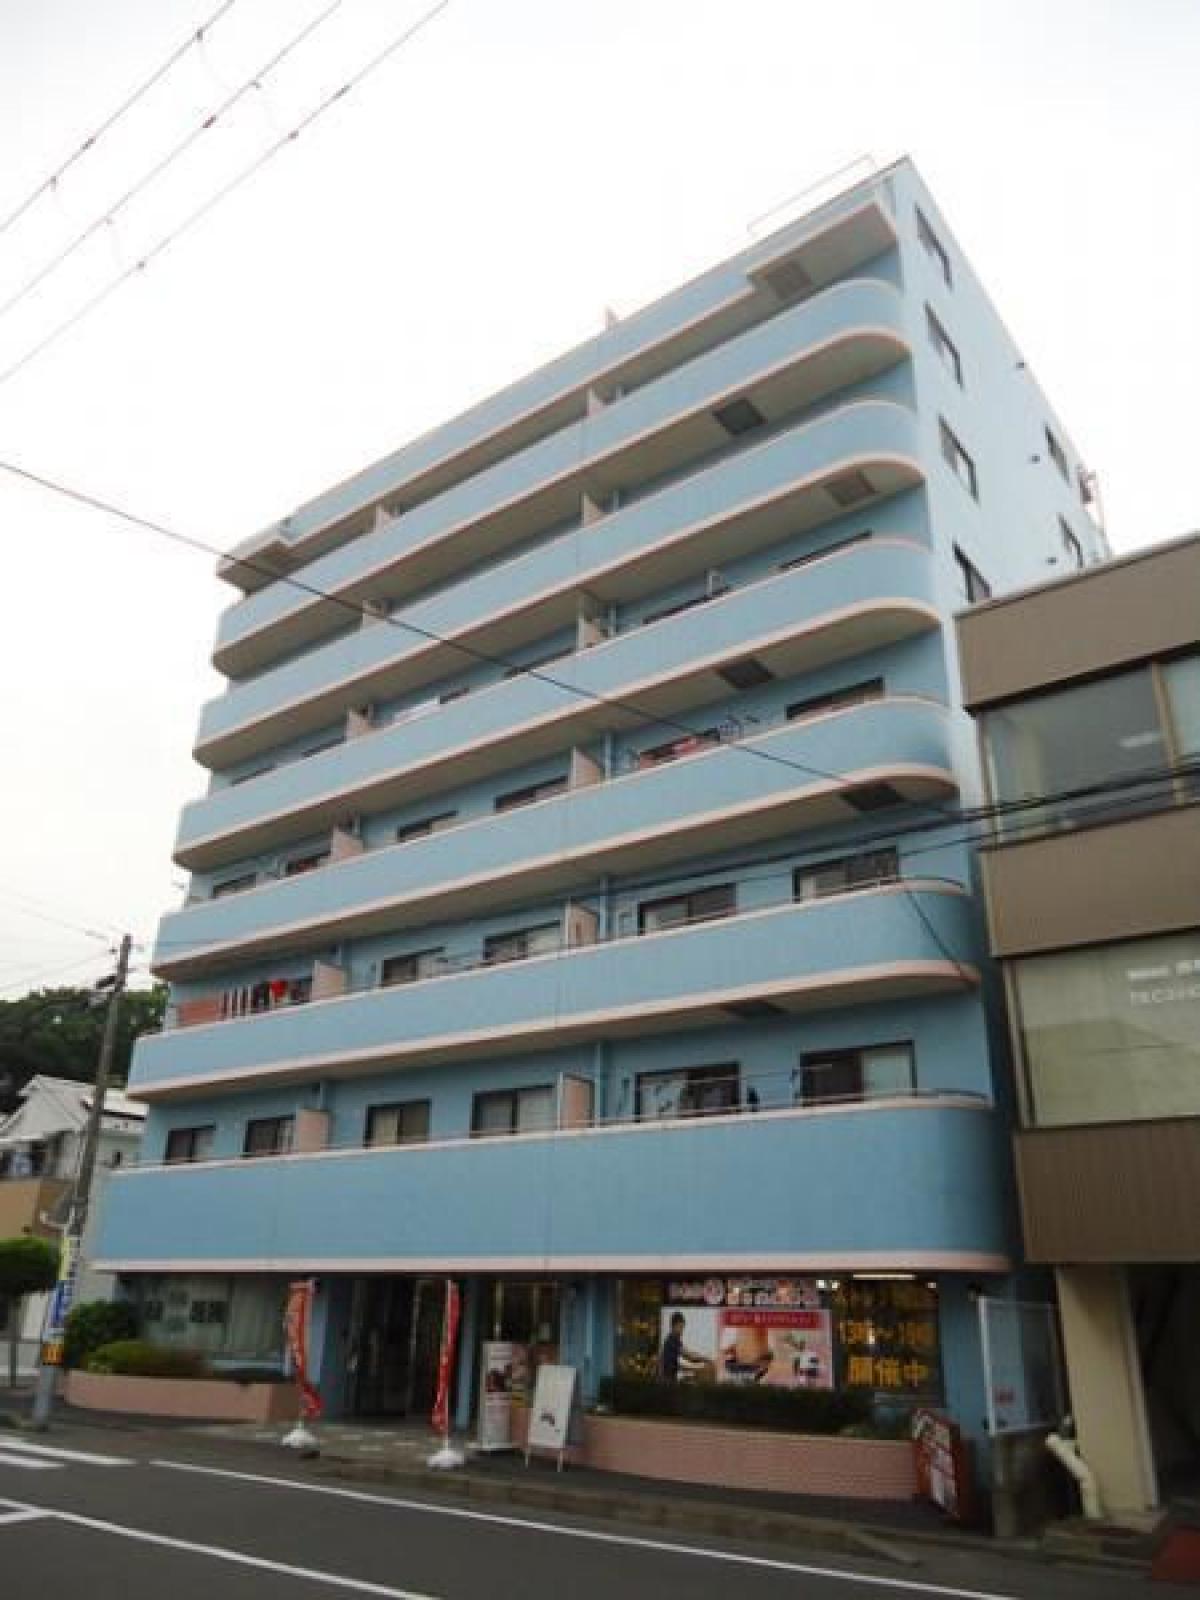 Picture of Apartment For Sale in Shiogama Shi, Miyagi, Japan